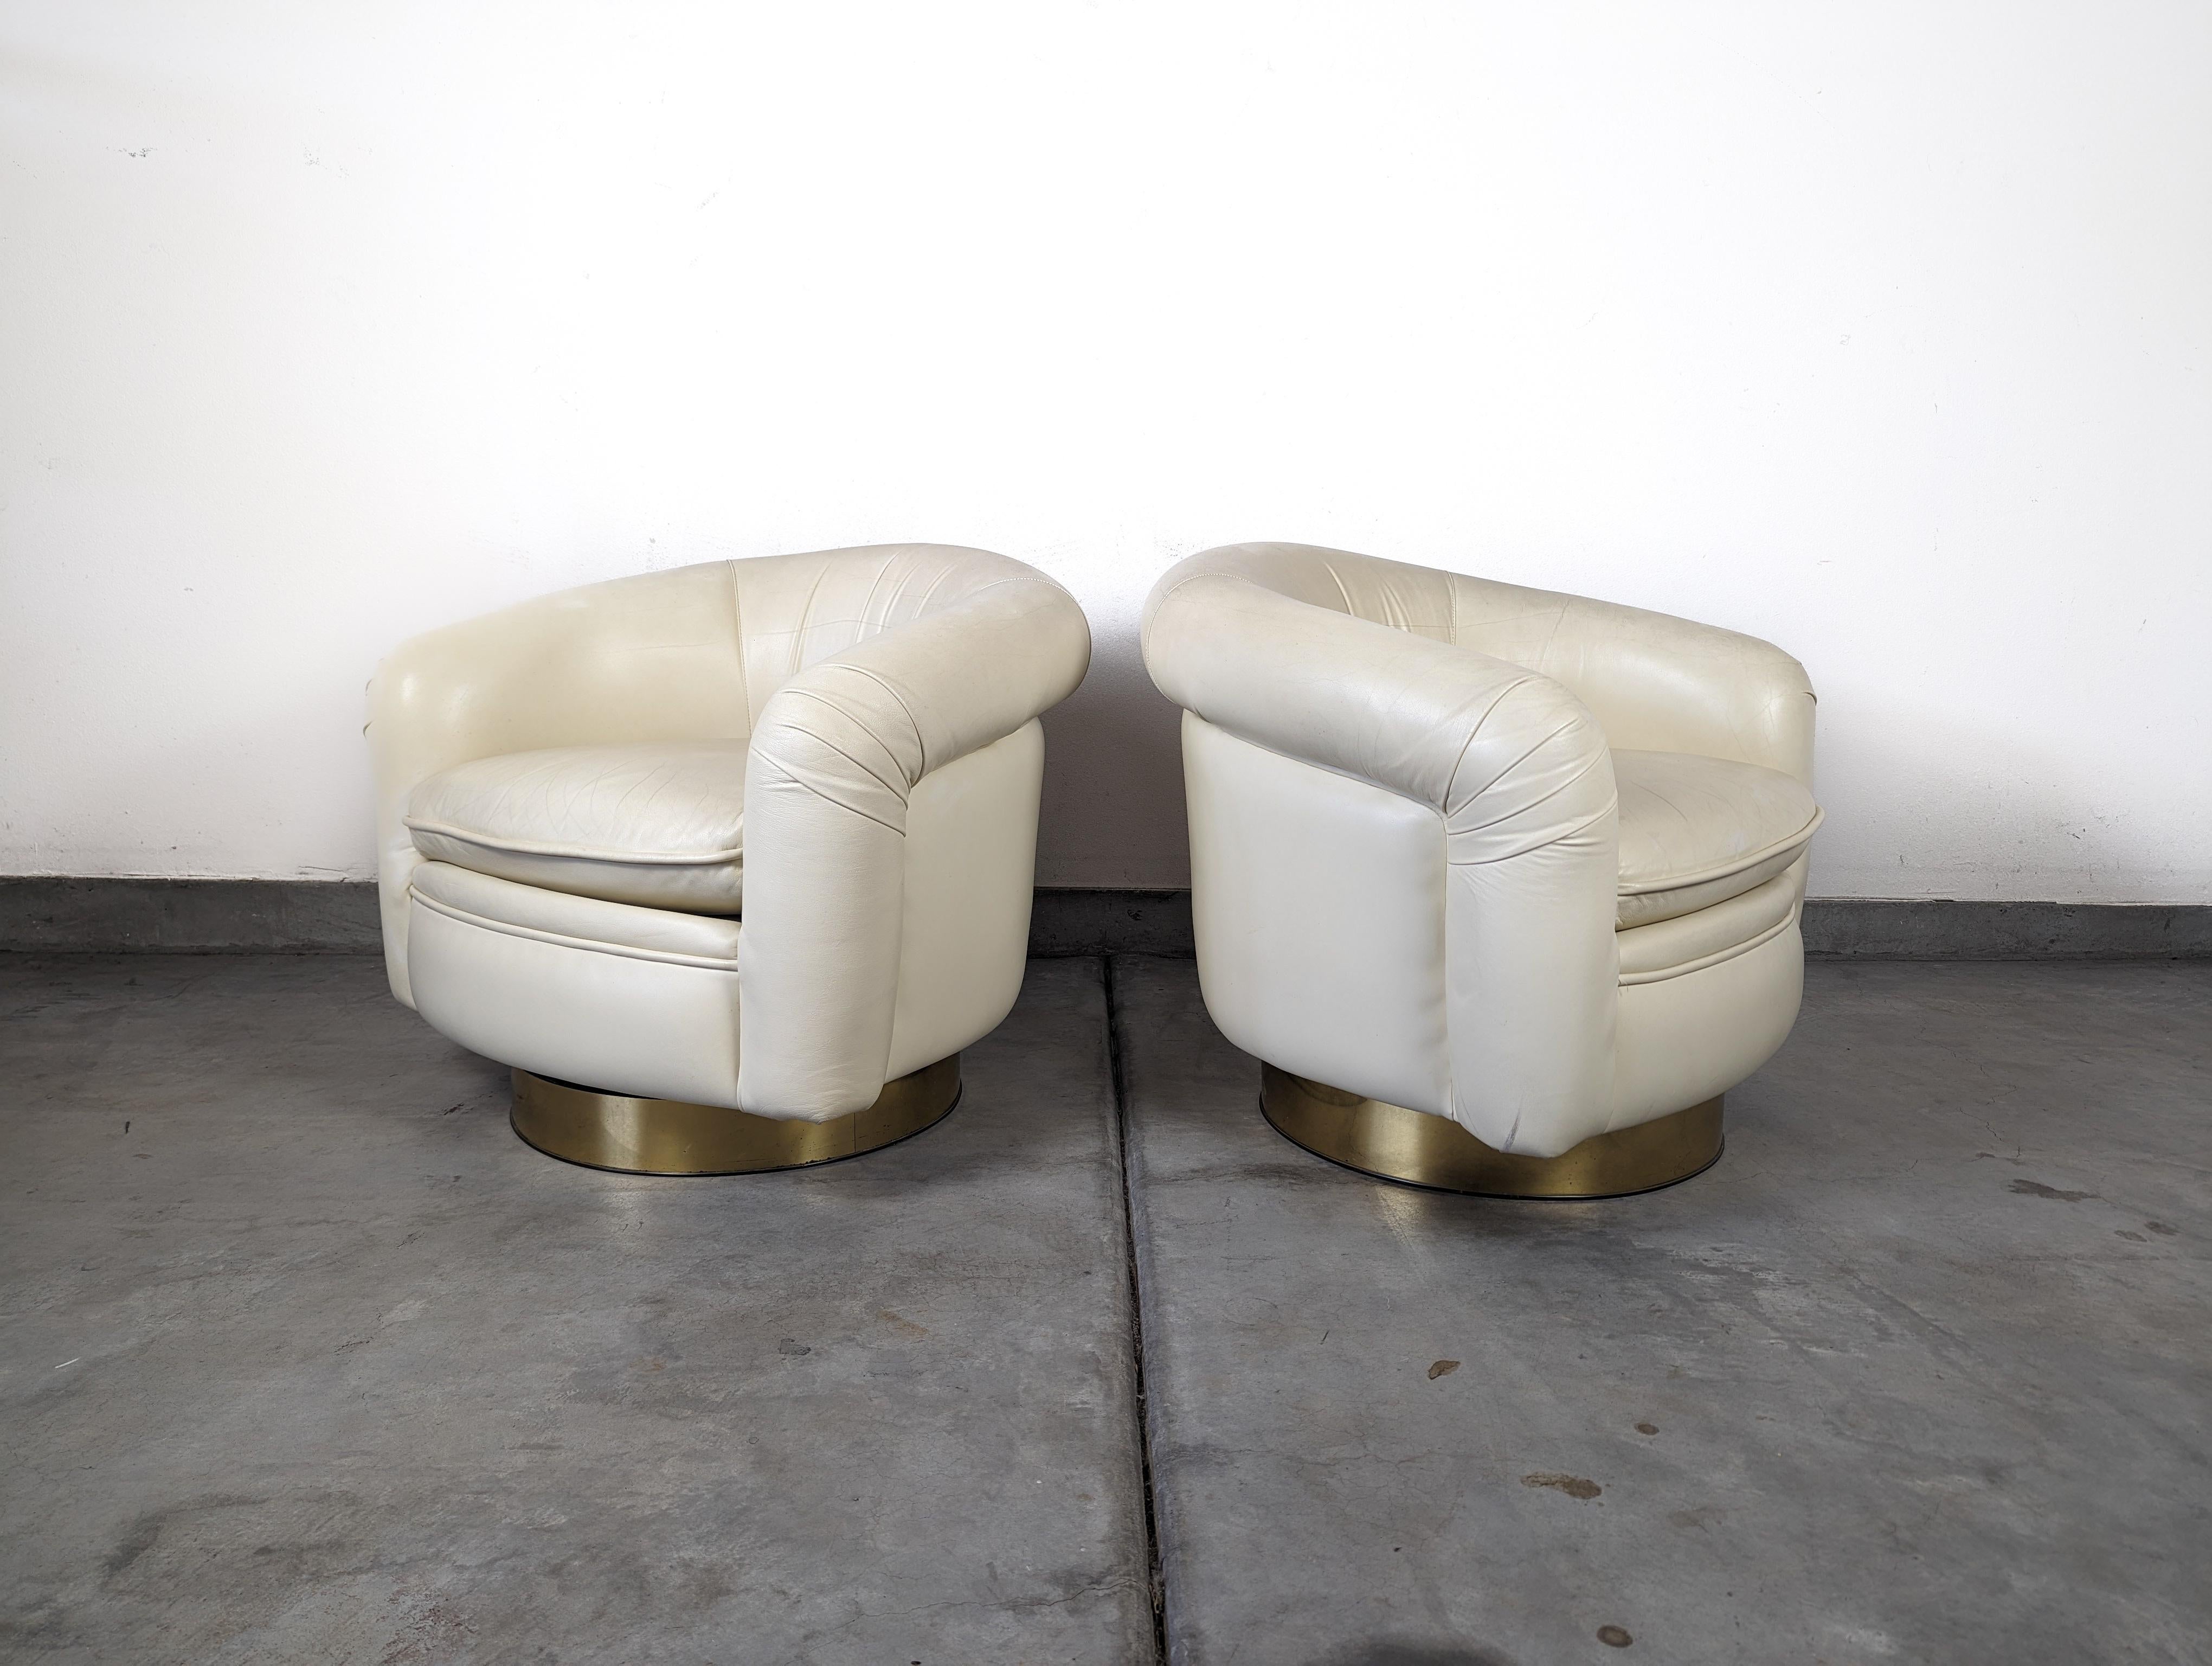 Brass Leather Tilt Swivel Lounge Chairs by Milo Baughman for Thayer Coggin, c1970s For Sale